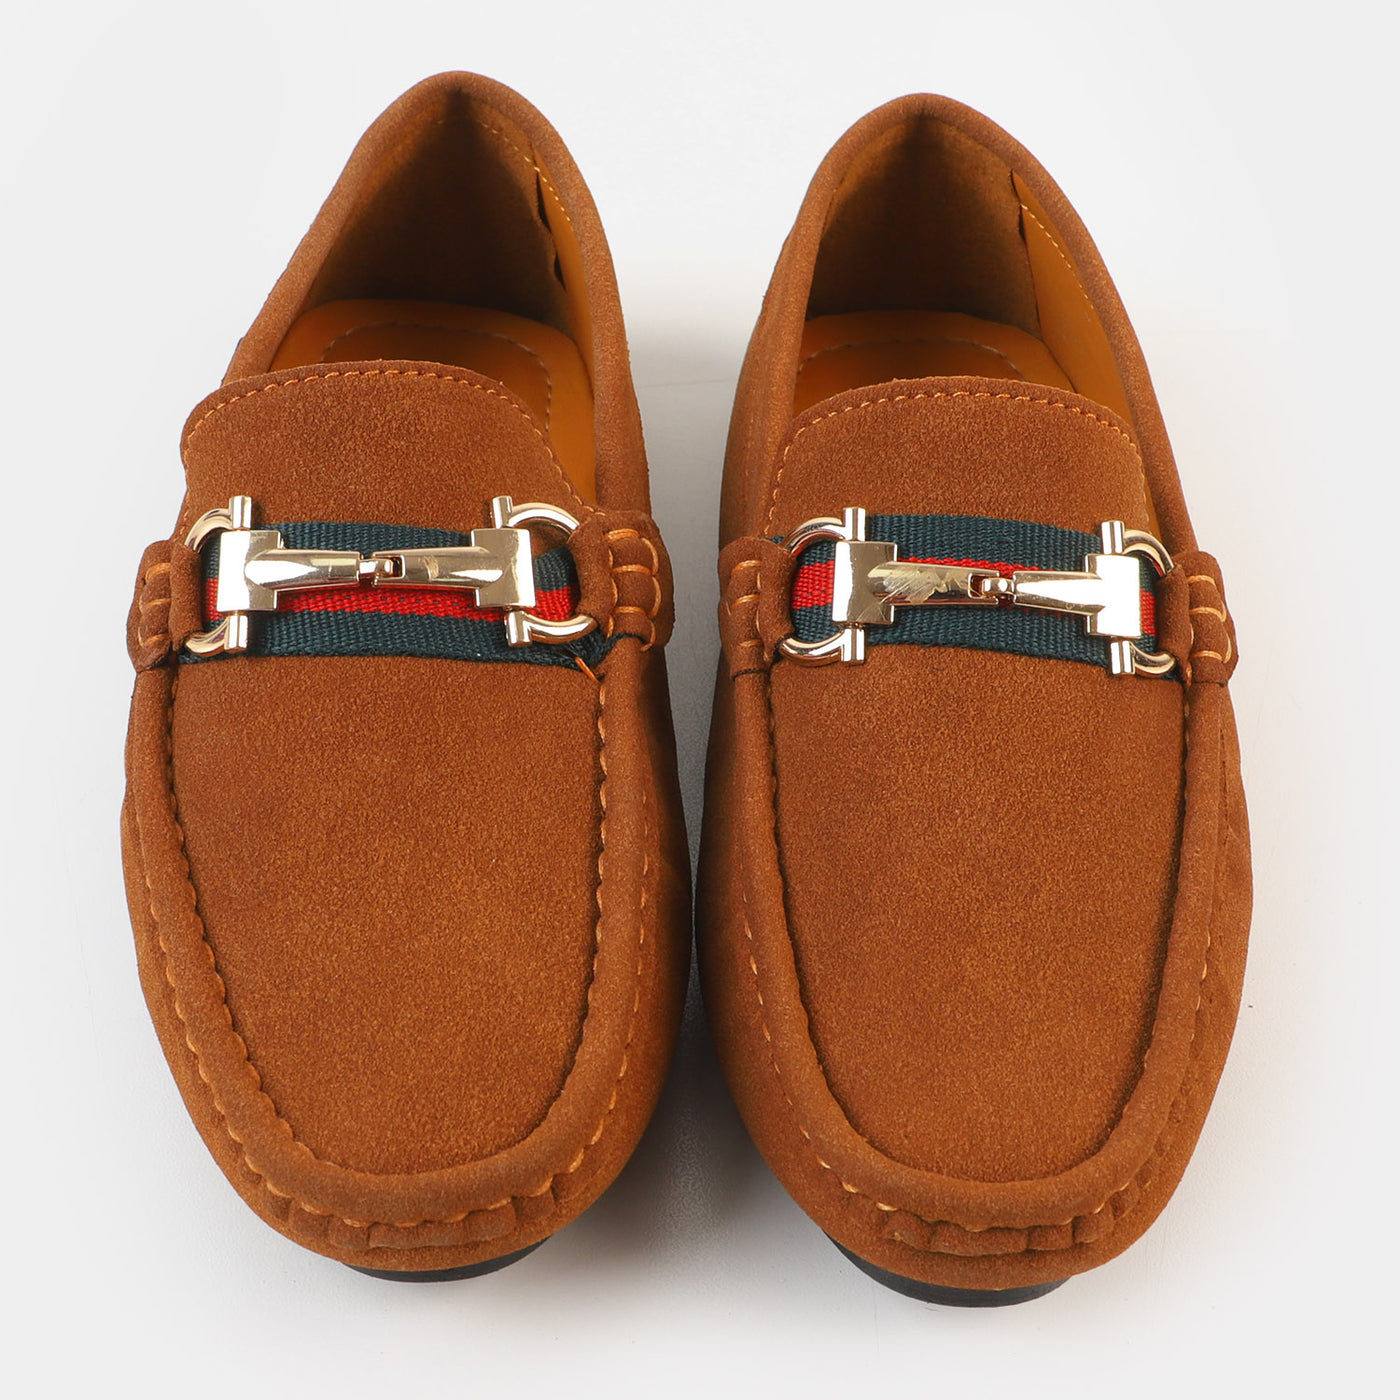 Boys Loafers - Brown